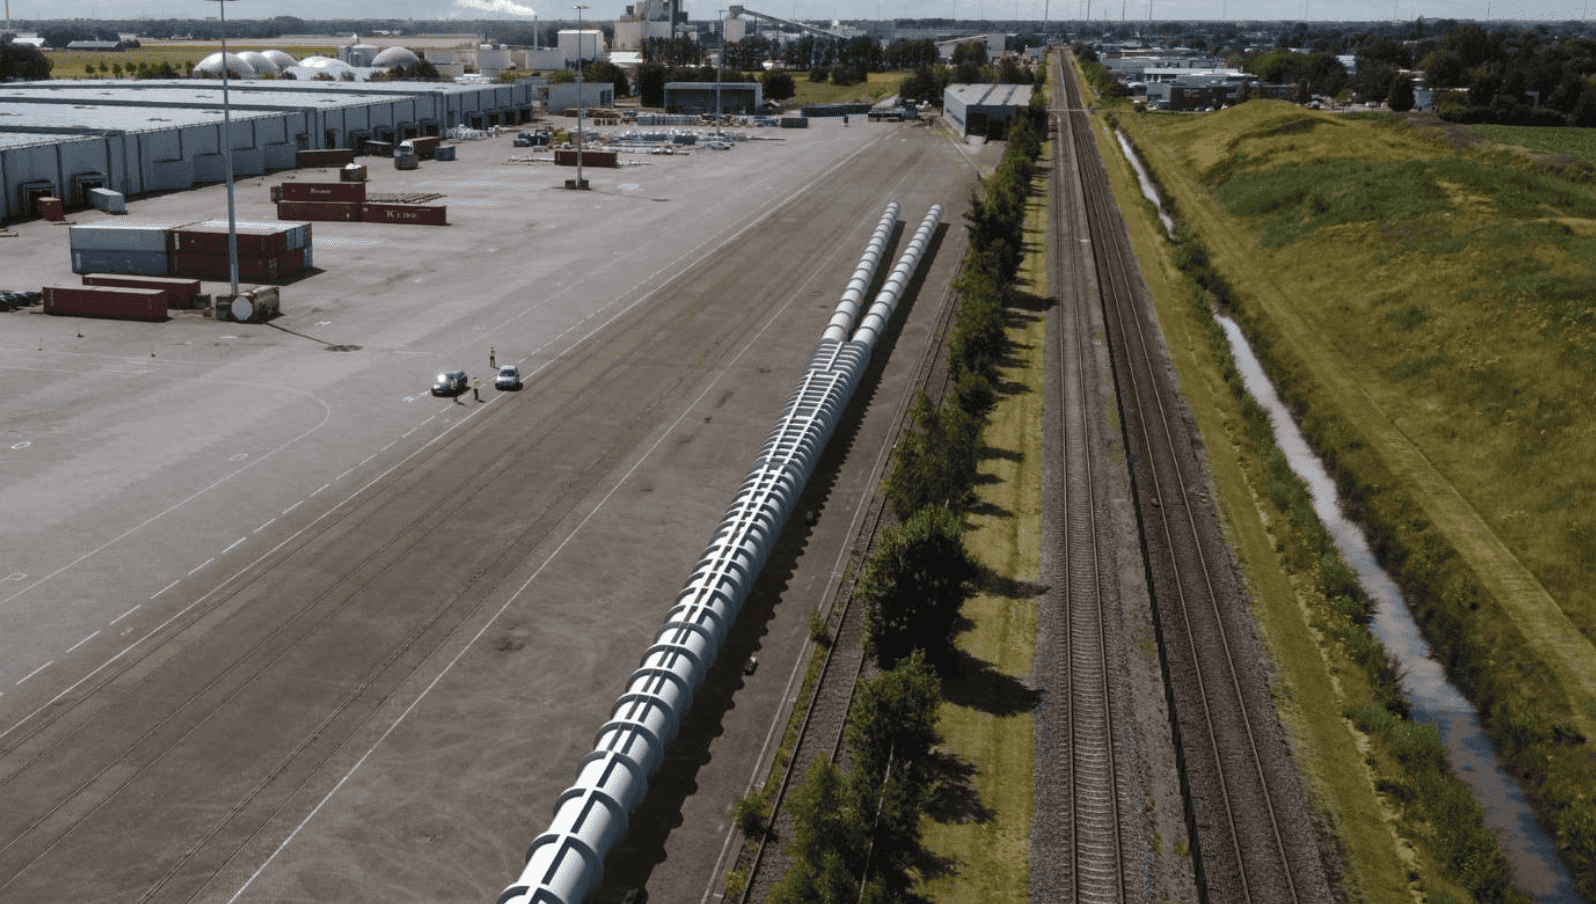 The European Hyperloop Center, to be built in Veendam, the Netherlands, aims to become 'the cornerstone in hyperloop innovation'